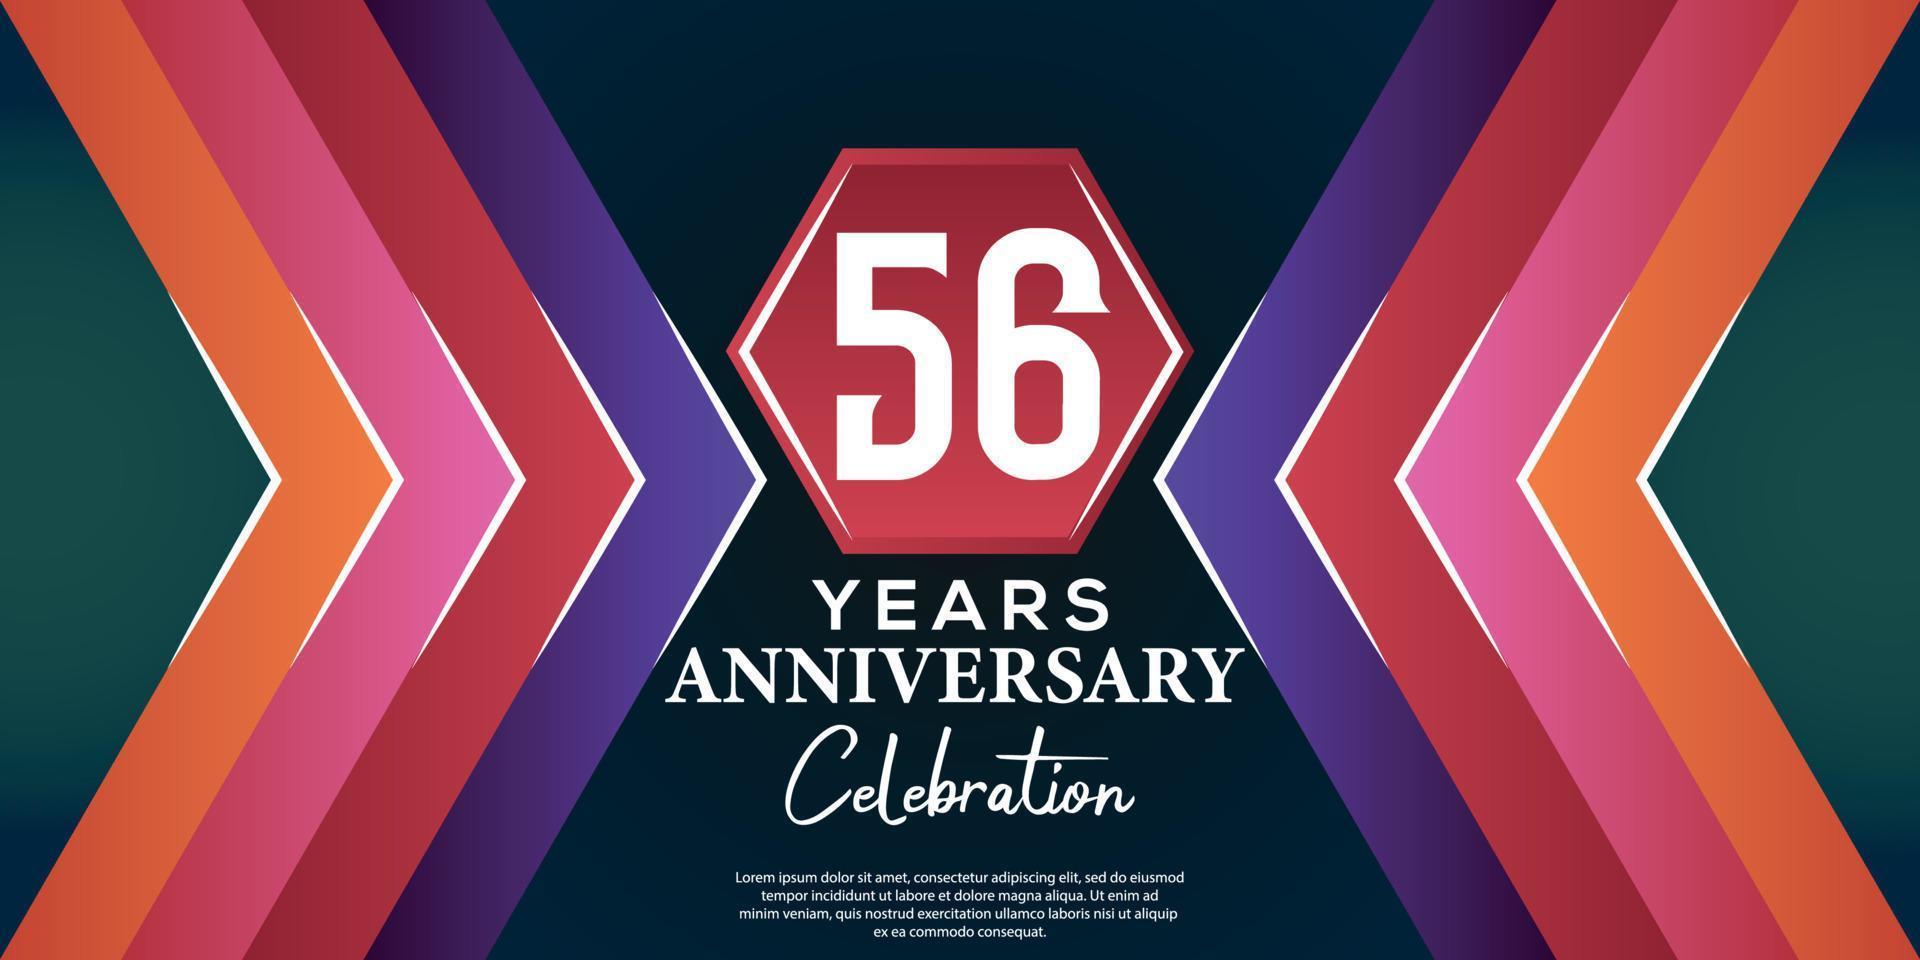 56 year anniversary celebration design with luxury abstract color style on luxury black backgroun vector